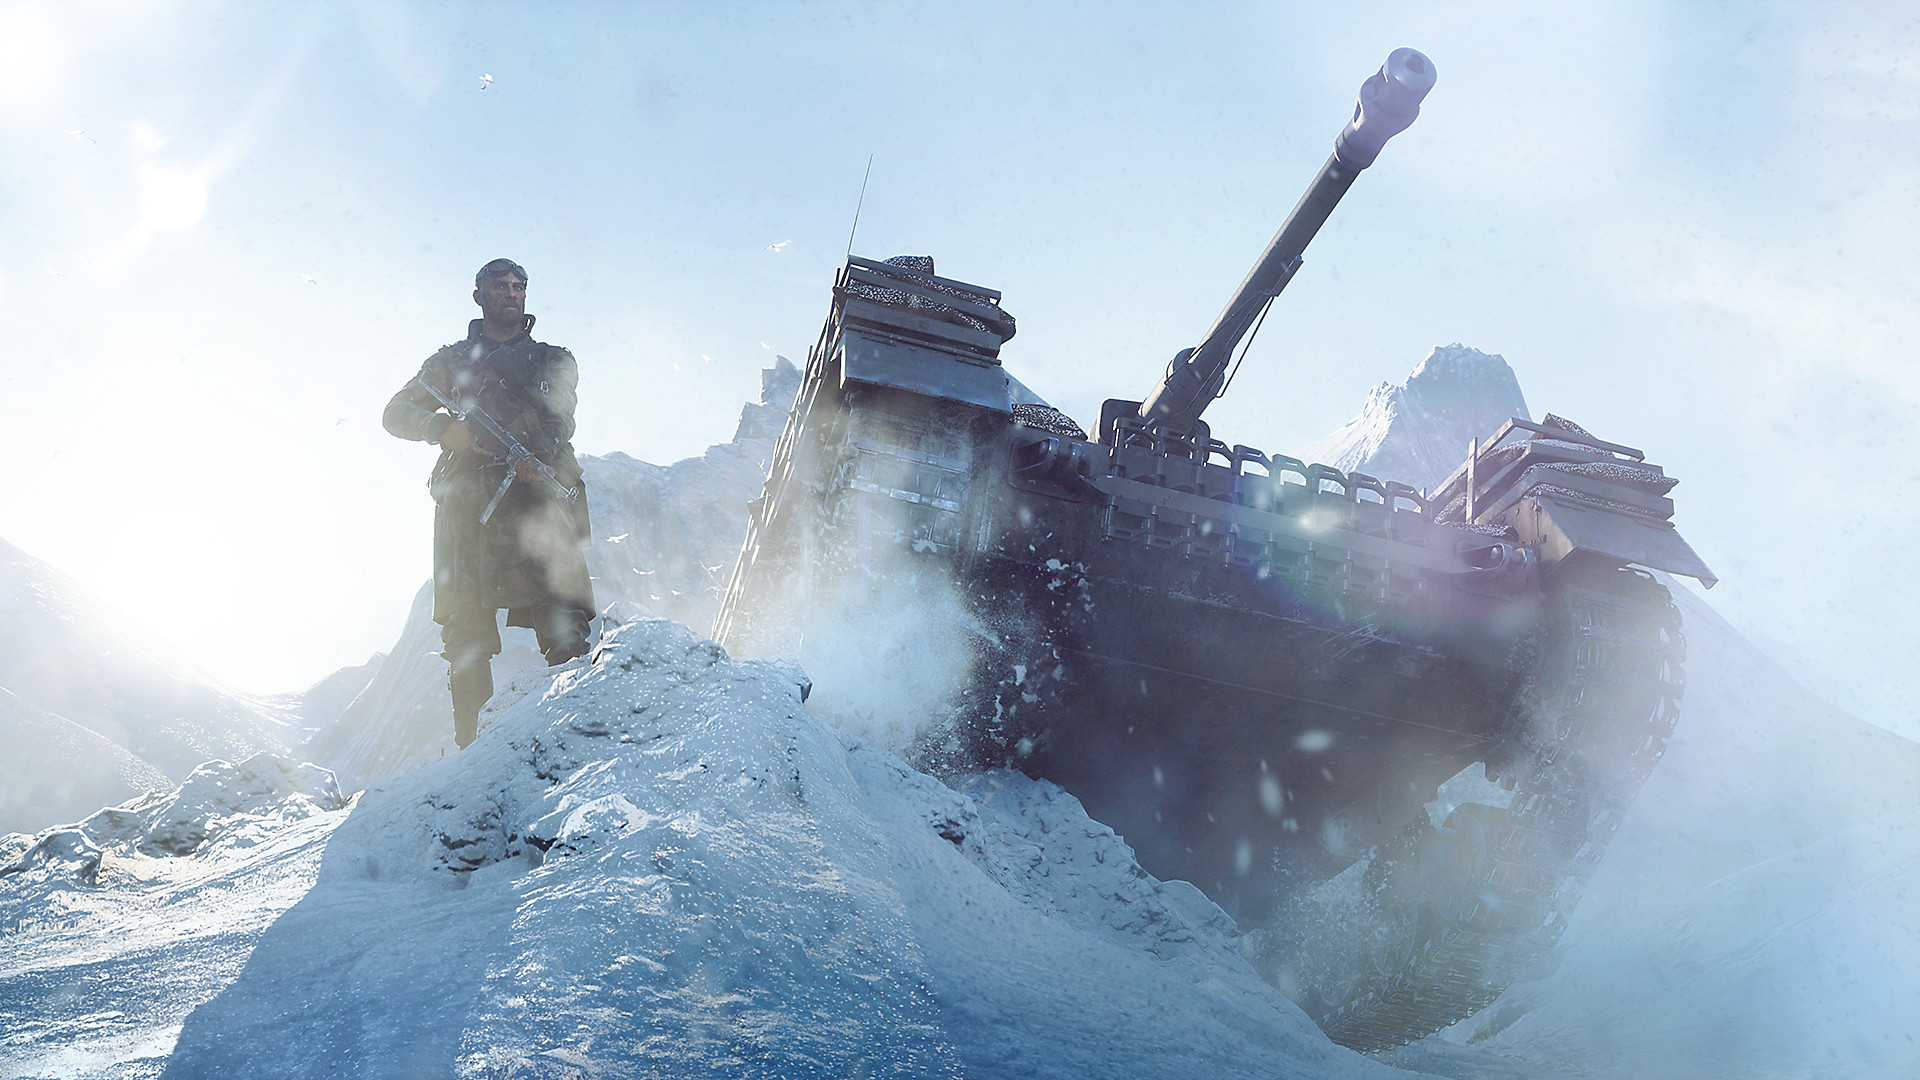 Battlefield V looks amazing—and it won't have paid season pass, map packs  [Updated]